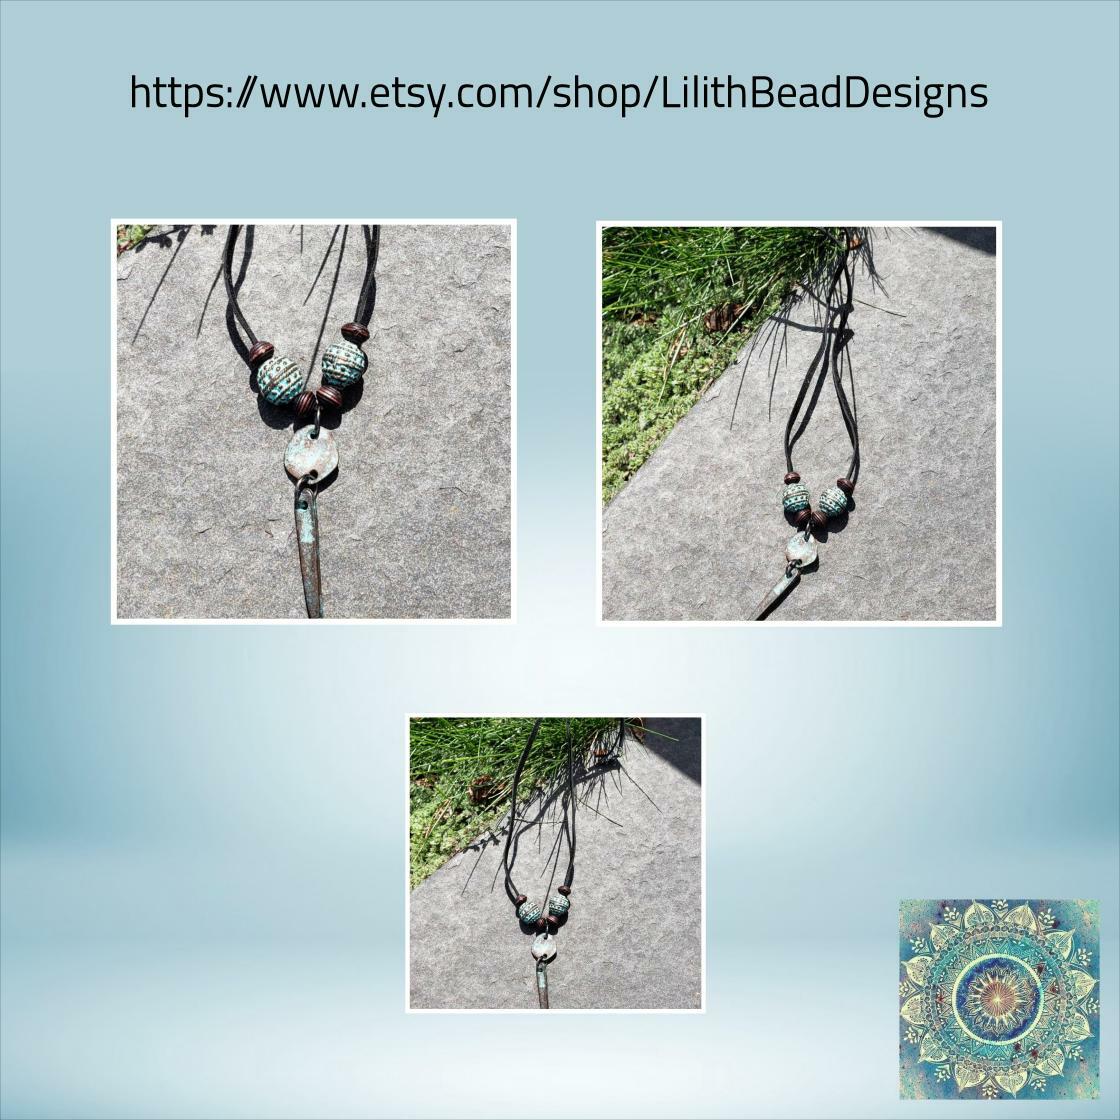 Pendant Necklace, leather necklace, Mykonos Petina pendant, Verdigris patina bead necklace, petina copper metal dagger beads, made in Greece #BohoJewelry #PendantJewelry 
$28.00
➤ etsy.com/listing/810192…